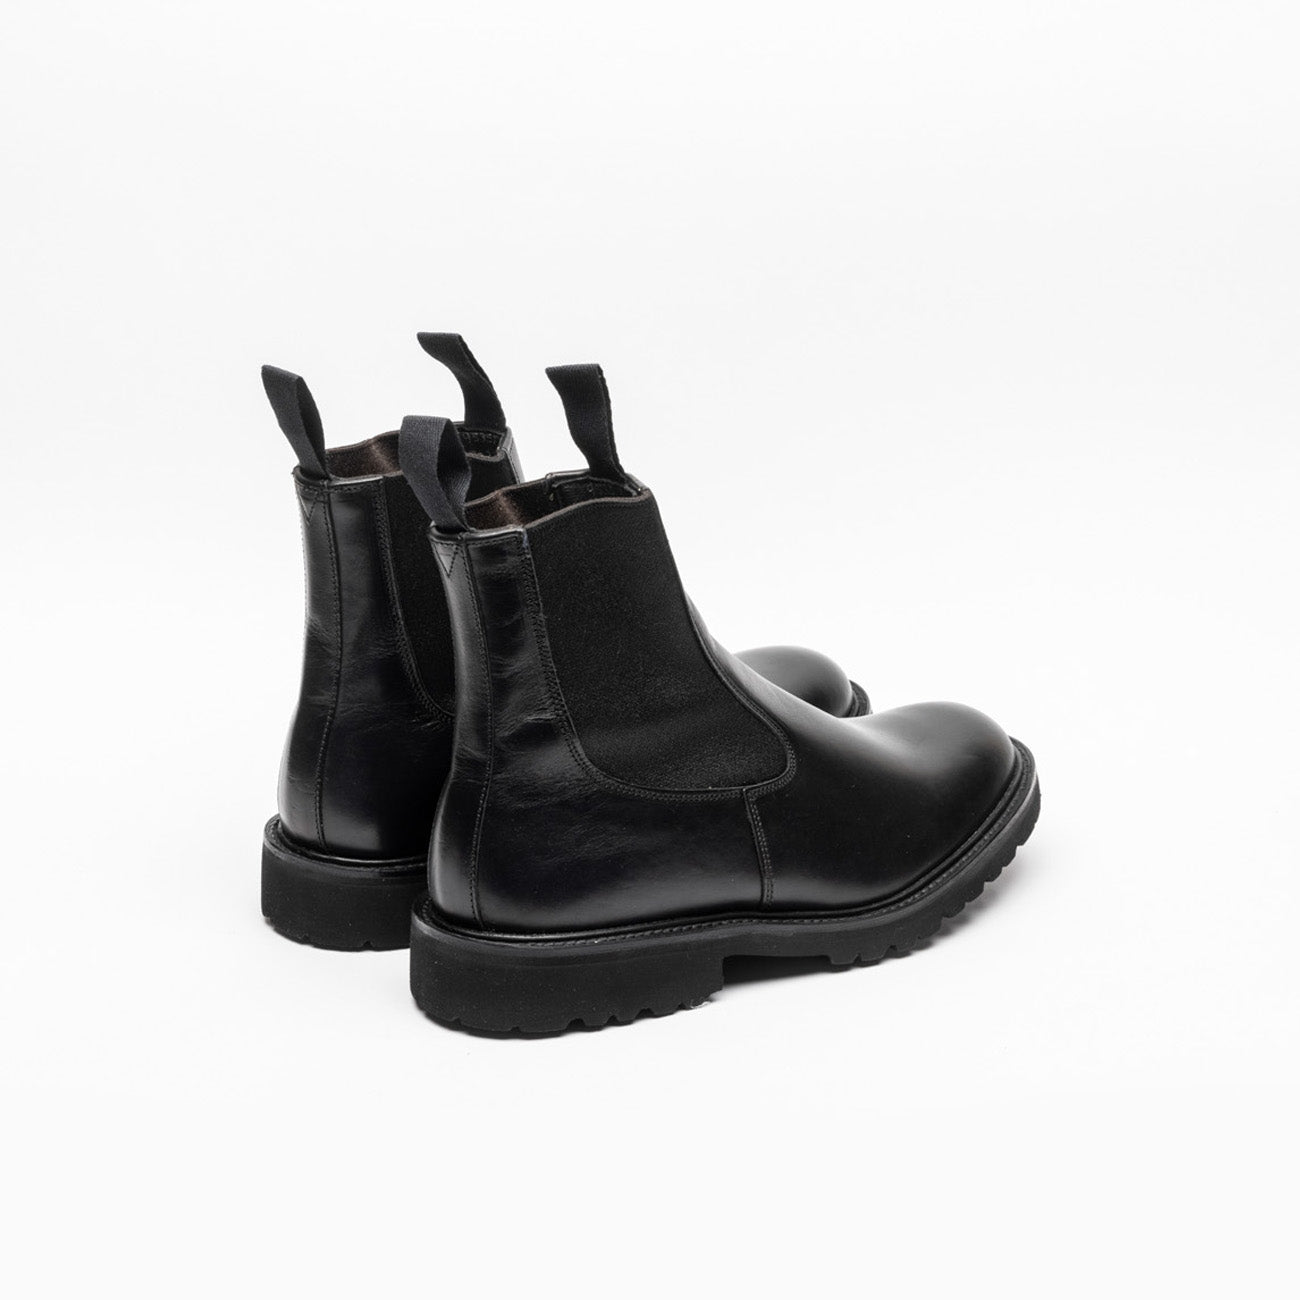 Tricker's Stephen chelsea boot in black leather